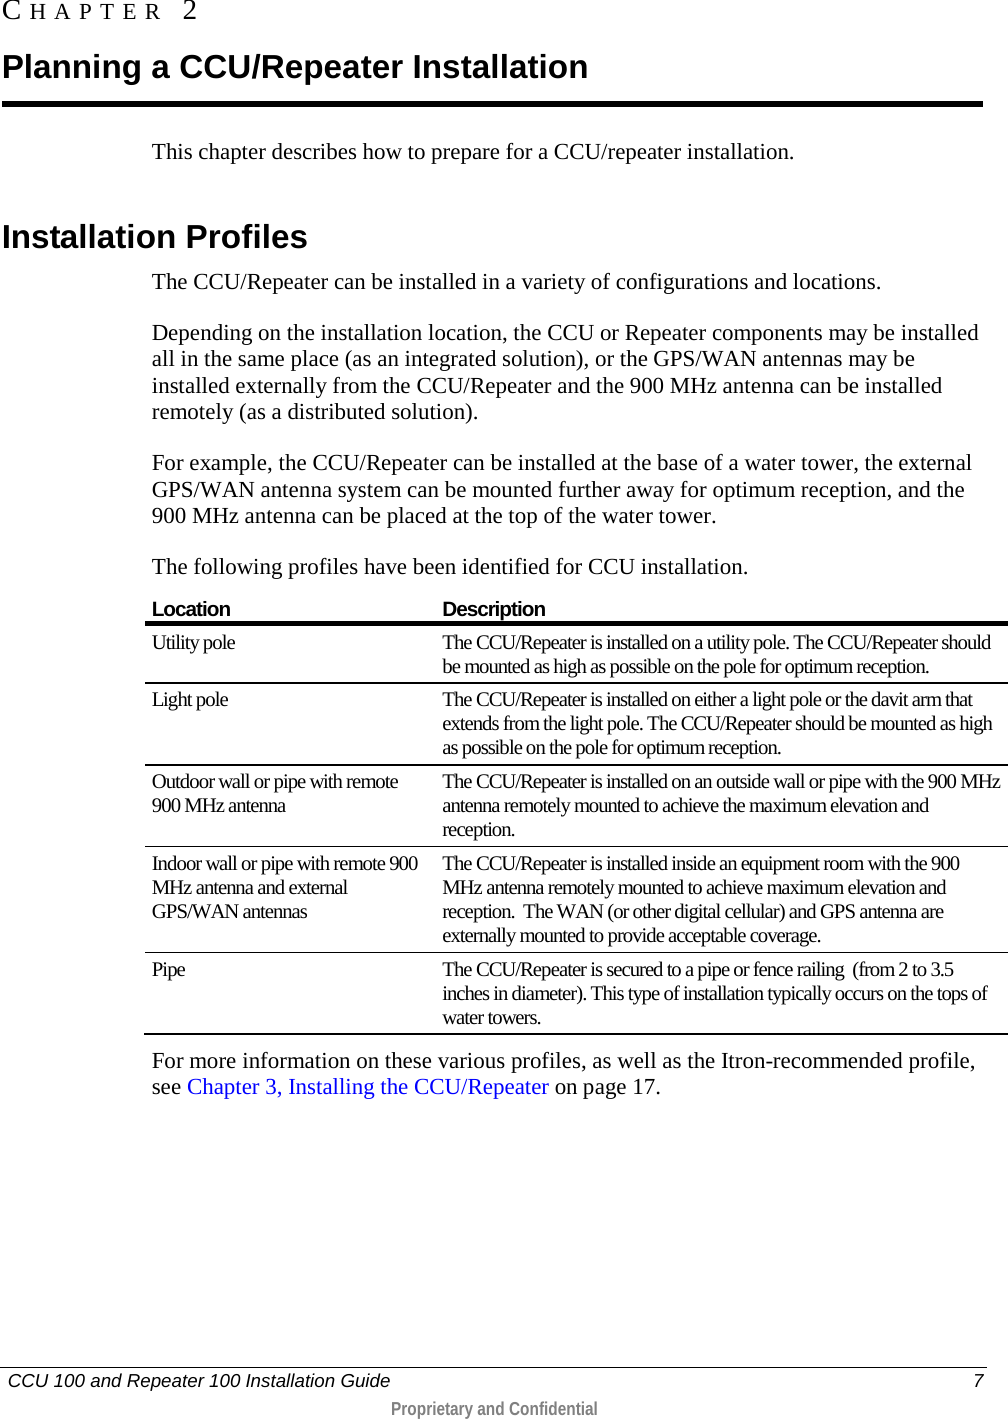   CCU 100 and Repeater 100 Installation Guide    7  Proprietary and Confidential  This chapter describes how to prepare for a CCU/repeater installation.   Installation Profiles The CCU/Repeater can be installed in a variety of configurations and locations.  Depending on the installation location, the CCU or Repeater components may be installed all in the same place (as an integrated solution), or the GPS/WAN antennas may be installed externally from the CCU/Repeater and the 900 MHz antenna can be installed remotely (as a distributed solution).  For example, the CCU/Repeater can be installed at the base of a water tower, the external GPS/WAN antenna system can be mounted further away for optimum reception, and the 900 MHz antenna can be placed at the top of the water tower.  The following profiles have been identified for CCU installation.  Location Description Utility pole The CCU/Repeater is installed on a utility pole. The CCU/Repeater should be mounted as high as possible on the pole for optimum reception.  Light pole The CCU/Repeater is installed on either a light pole or the davit arm that extends from the light pole. The CCU/Repeater should be mounted as high as possible on the pole for optimum reception.  Outdoor wall or pipe with remote 900 MHz antenna The CCU/Repeater is installed on an outside wall or pipe with the 900 MHz antenna remotely mounted to achieve the maximum elevation and reception. Indoor wall or pipe with remote 900 MHz antenna and external GPS/WAN antennas The CCU/Repeater is installed inside an equipment room with the 900 MHz antenna remotely mounted to achieve maximum elevation and reception.  The WAN (or other digital cellular) and GPS antenna are externally mounted to provide acceptable coverage. Pipe The CCU/Repeater is secured to a pipe or fence railing  (from 2 to 3.5 inches in diameter). This type of installation typically occurs on the tops of water towers. For more information on these various profiles, as well as the Itron-recommended profile, see Chapter 3, Installing the CCU/Repeater on page 17. CHAPTER  2  Planning a CCU/Repeater Installation 